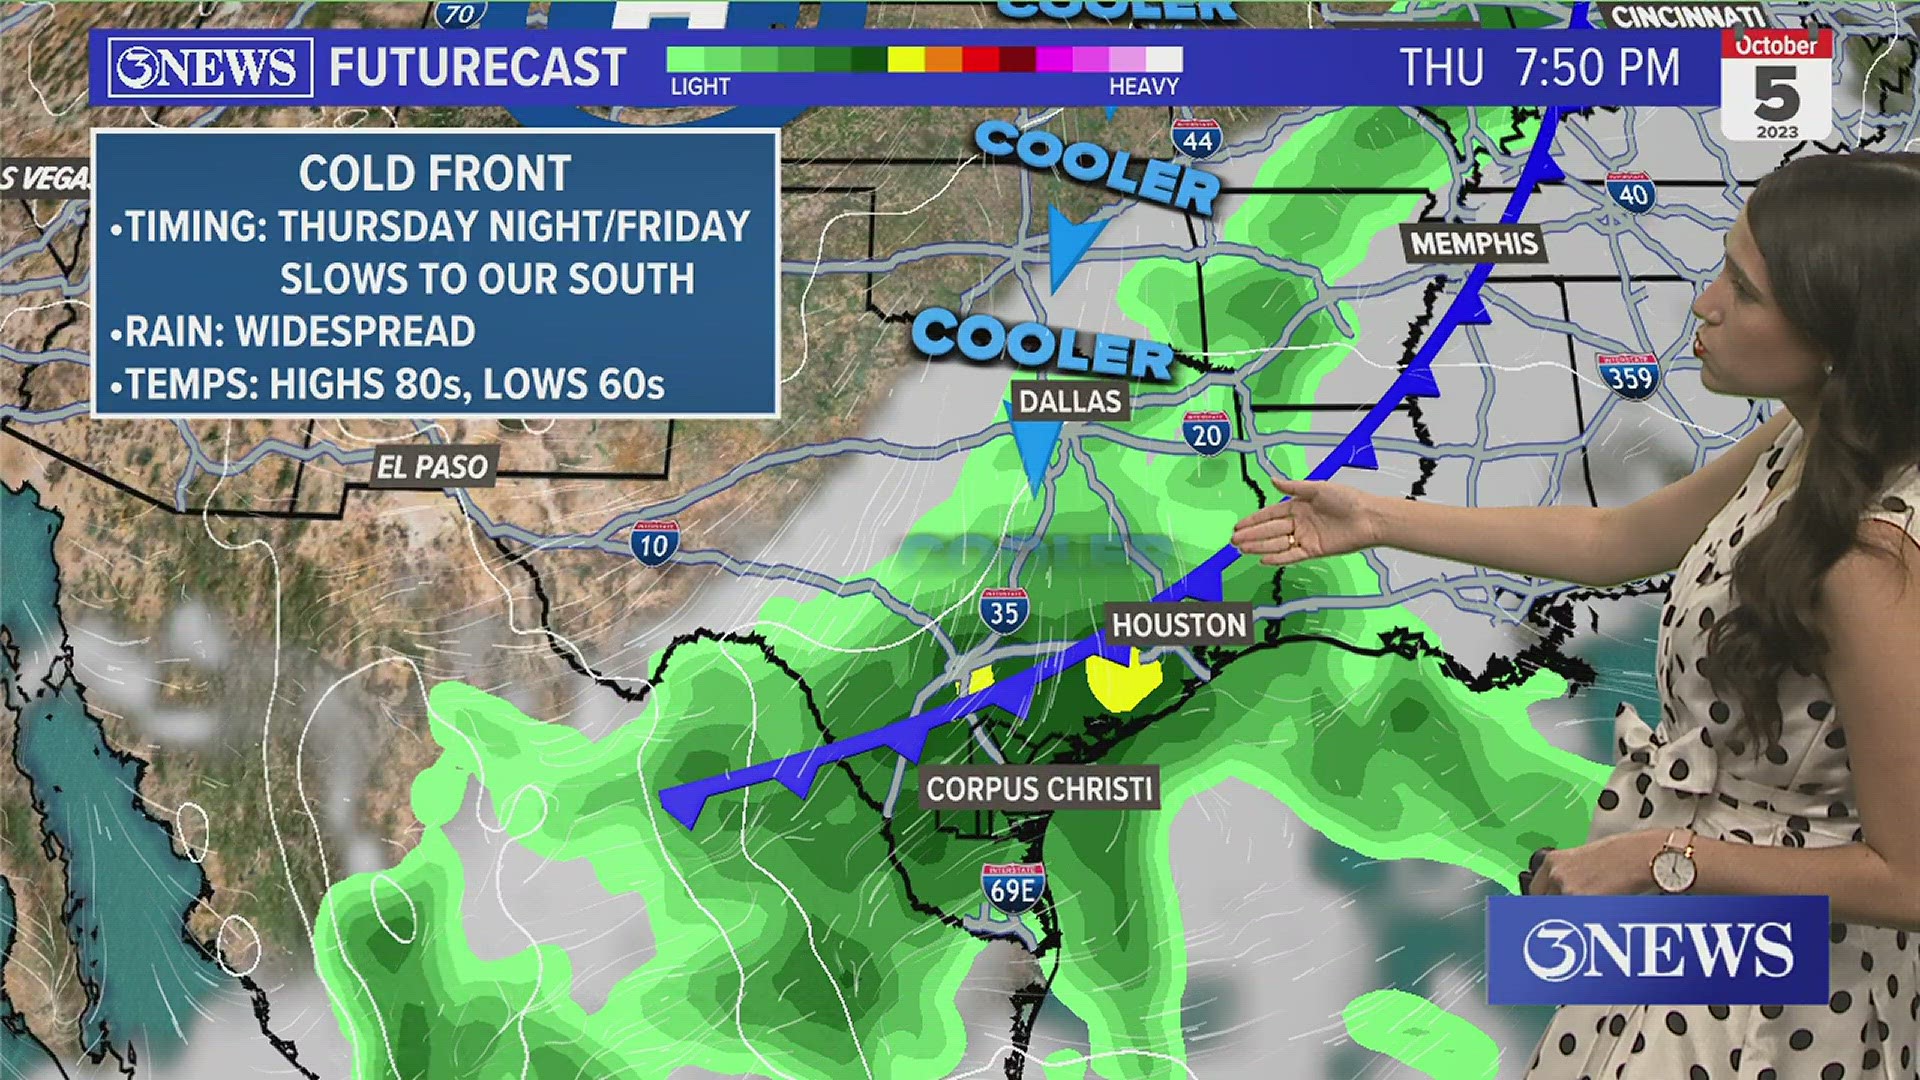 Beneficial rainfall is expected this week around the Coastal Bend from daily scattered showers. On top of that, a cold front will bring more rain plus a cooldown.